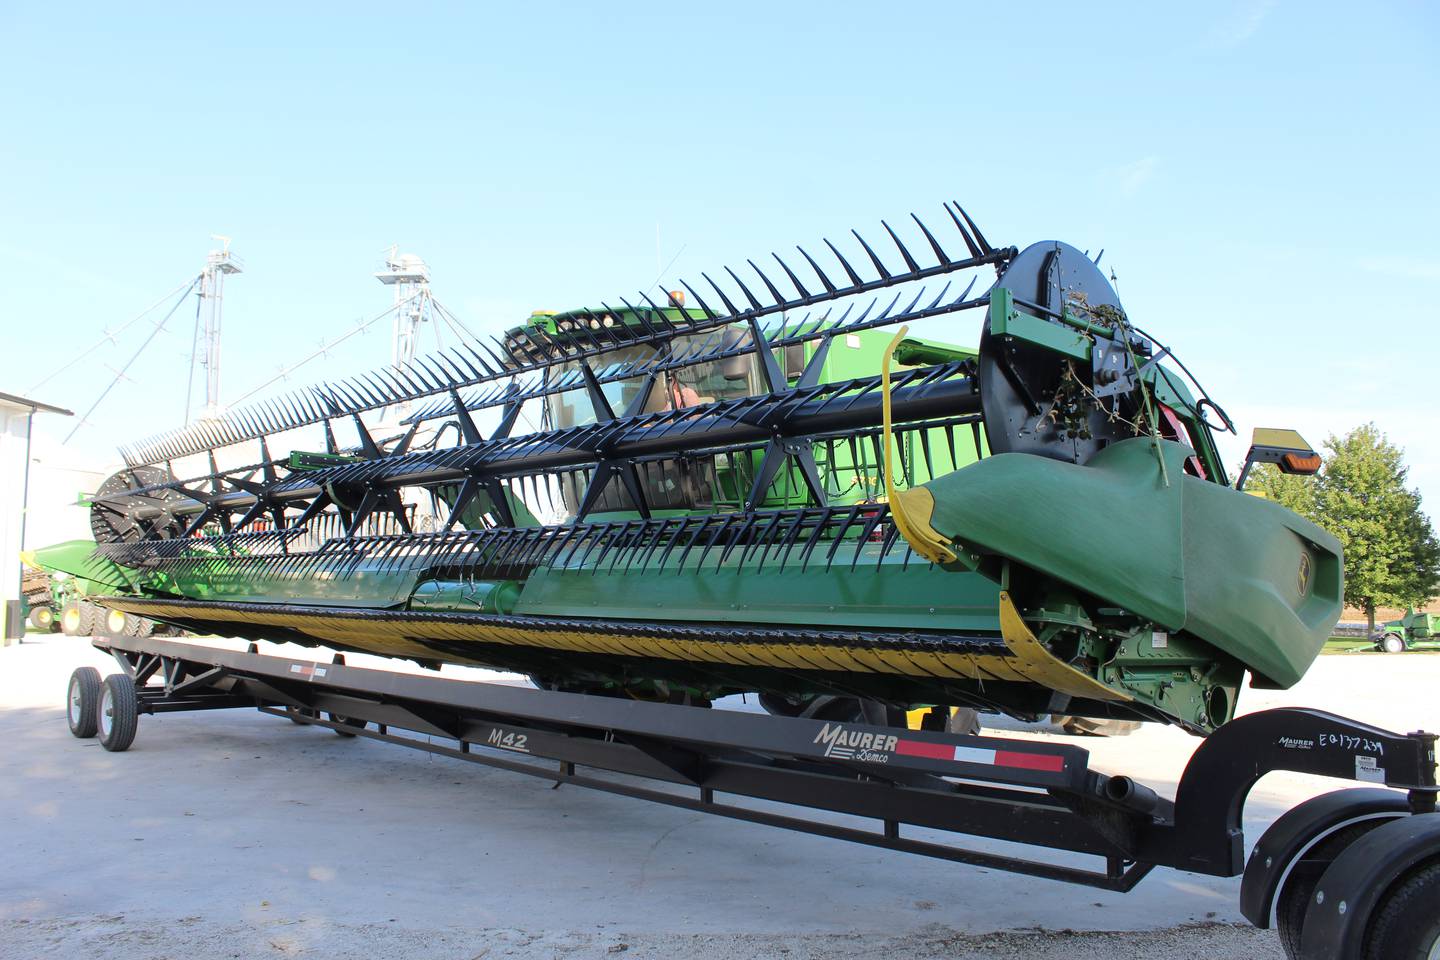 Last year, Chris Gould bought an All-Wheel Steer head mover. “It is awesome because it trails perfectly which makes it possible to pull behind the combine,” he says.